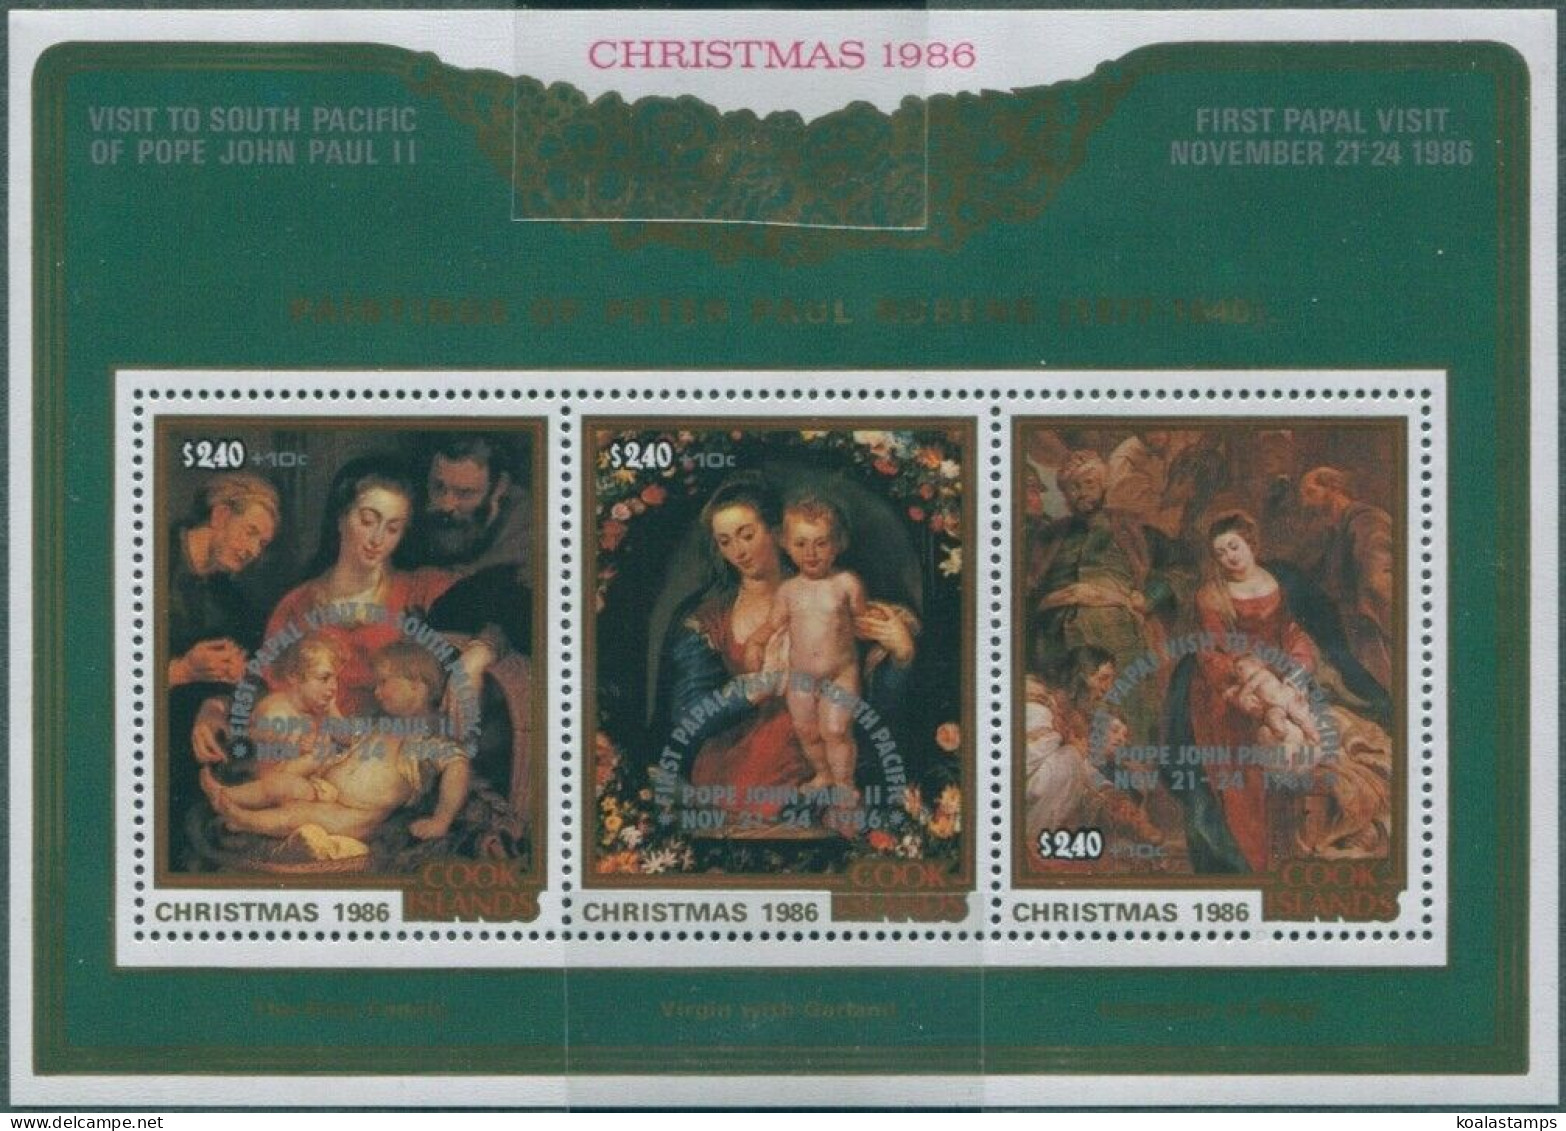 Cook Islands 1986 SG1088 Christmas Papal Visit Ovpt MS MNH - Cook